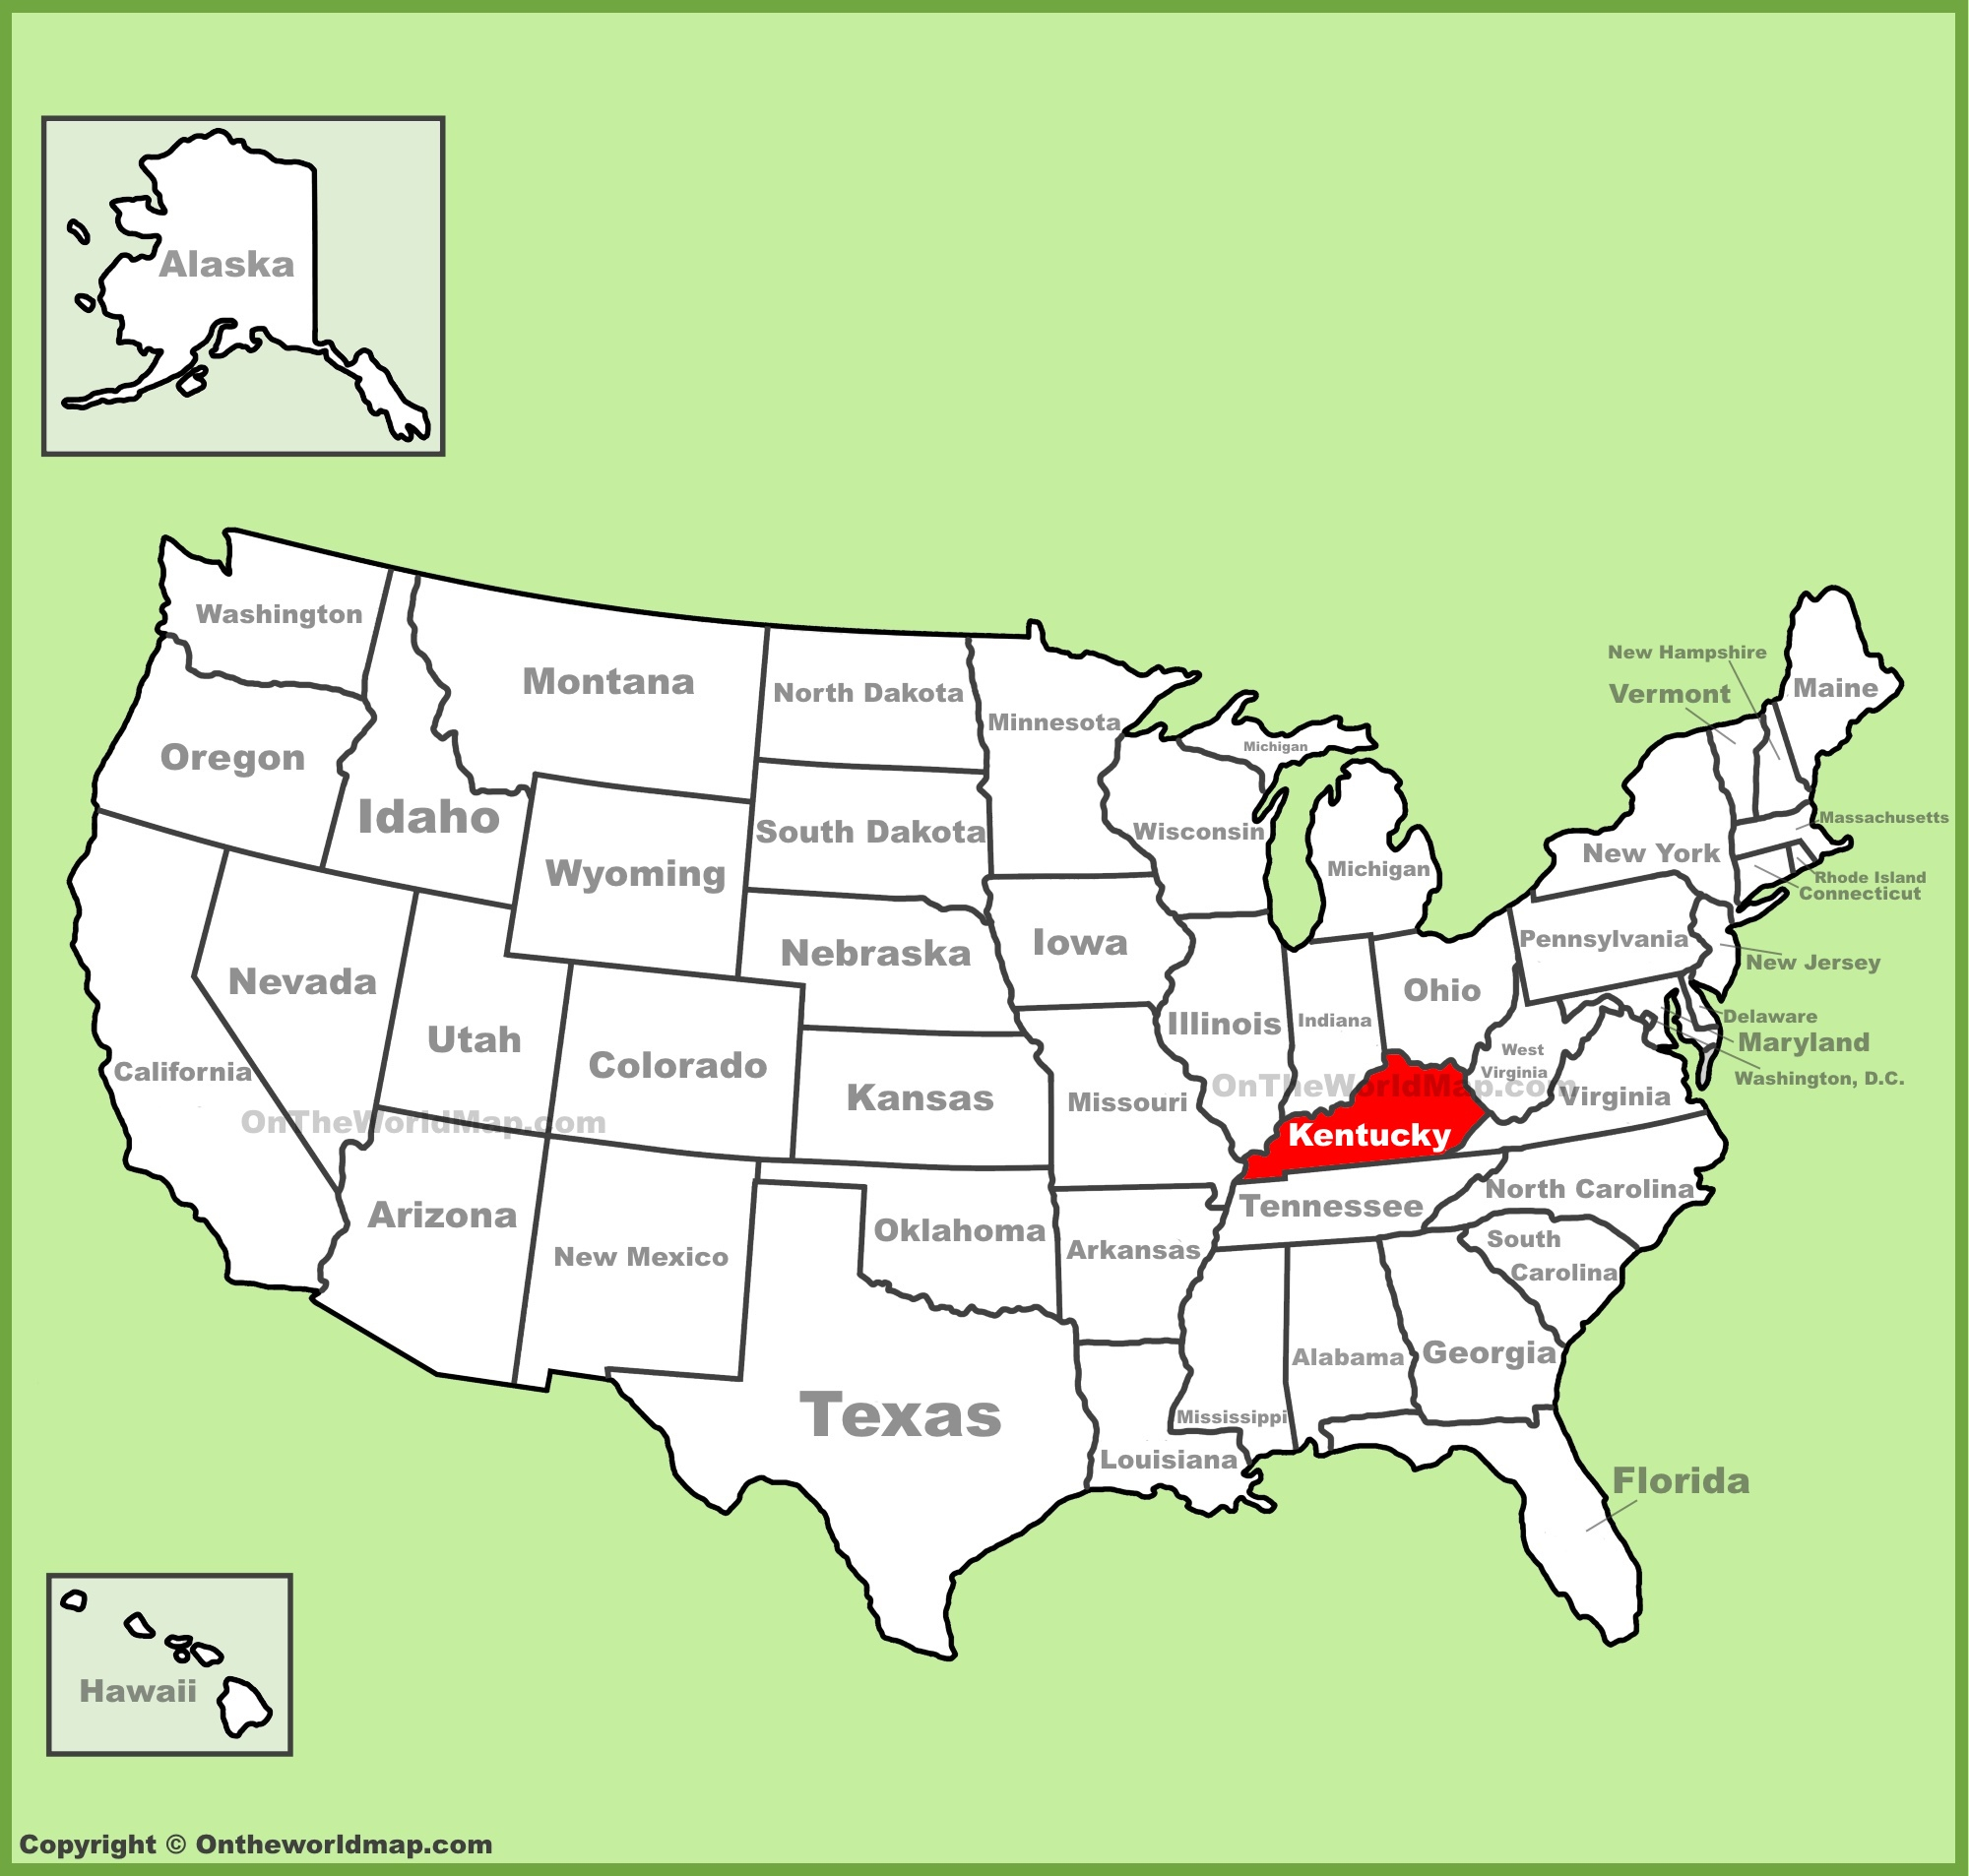 Kentucky State Maps | Usa | Maps Of Kentucky (Ky) - Printable Map Of Bowling Green Ky